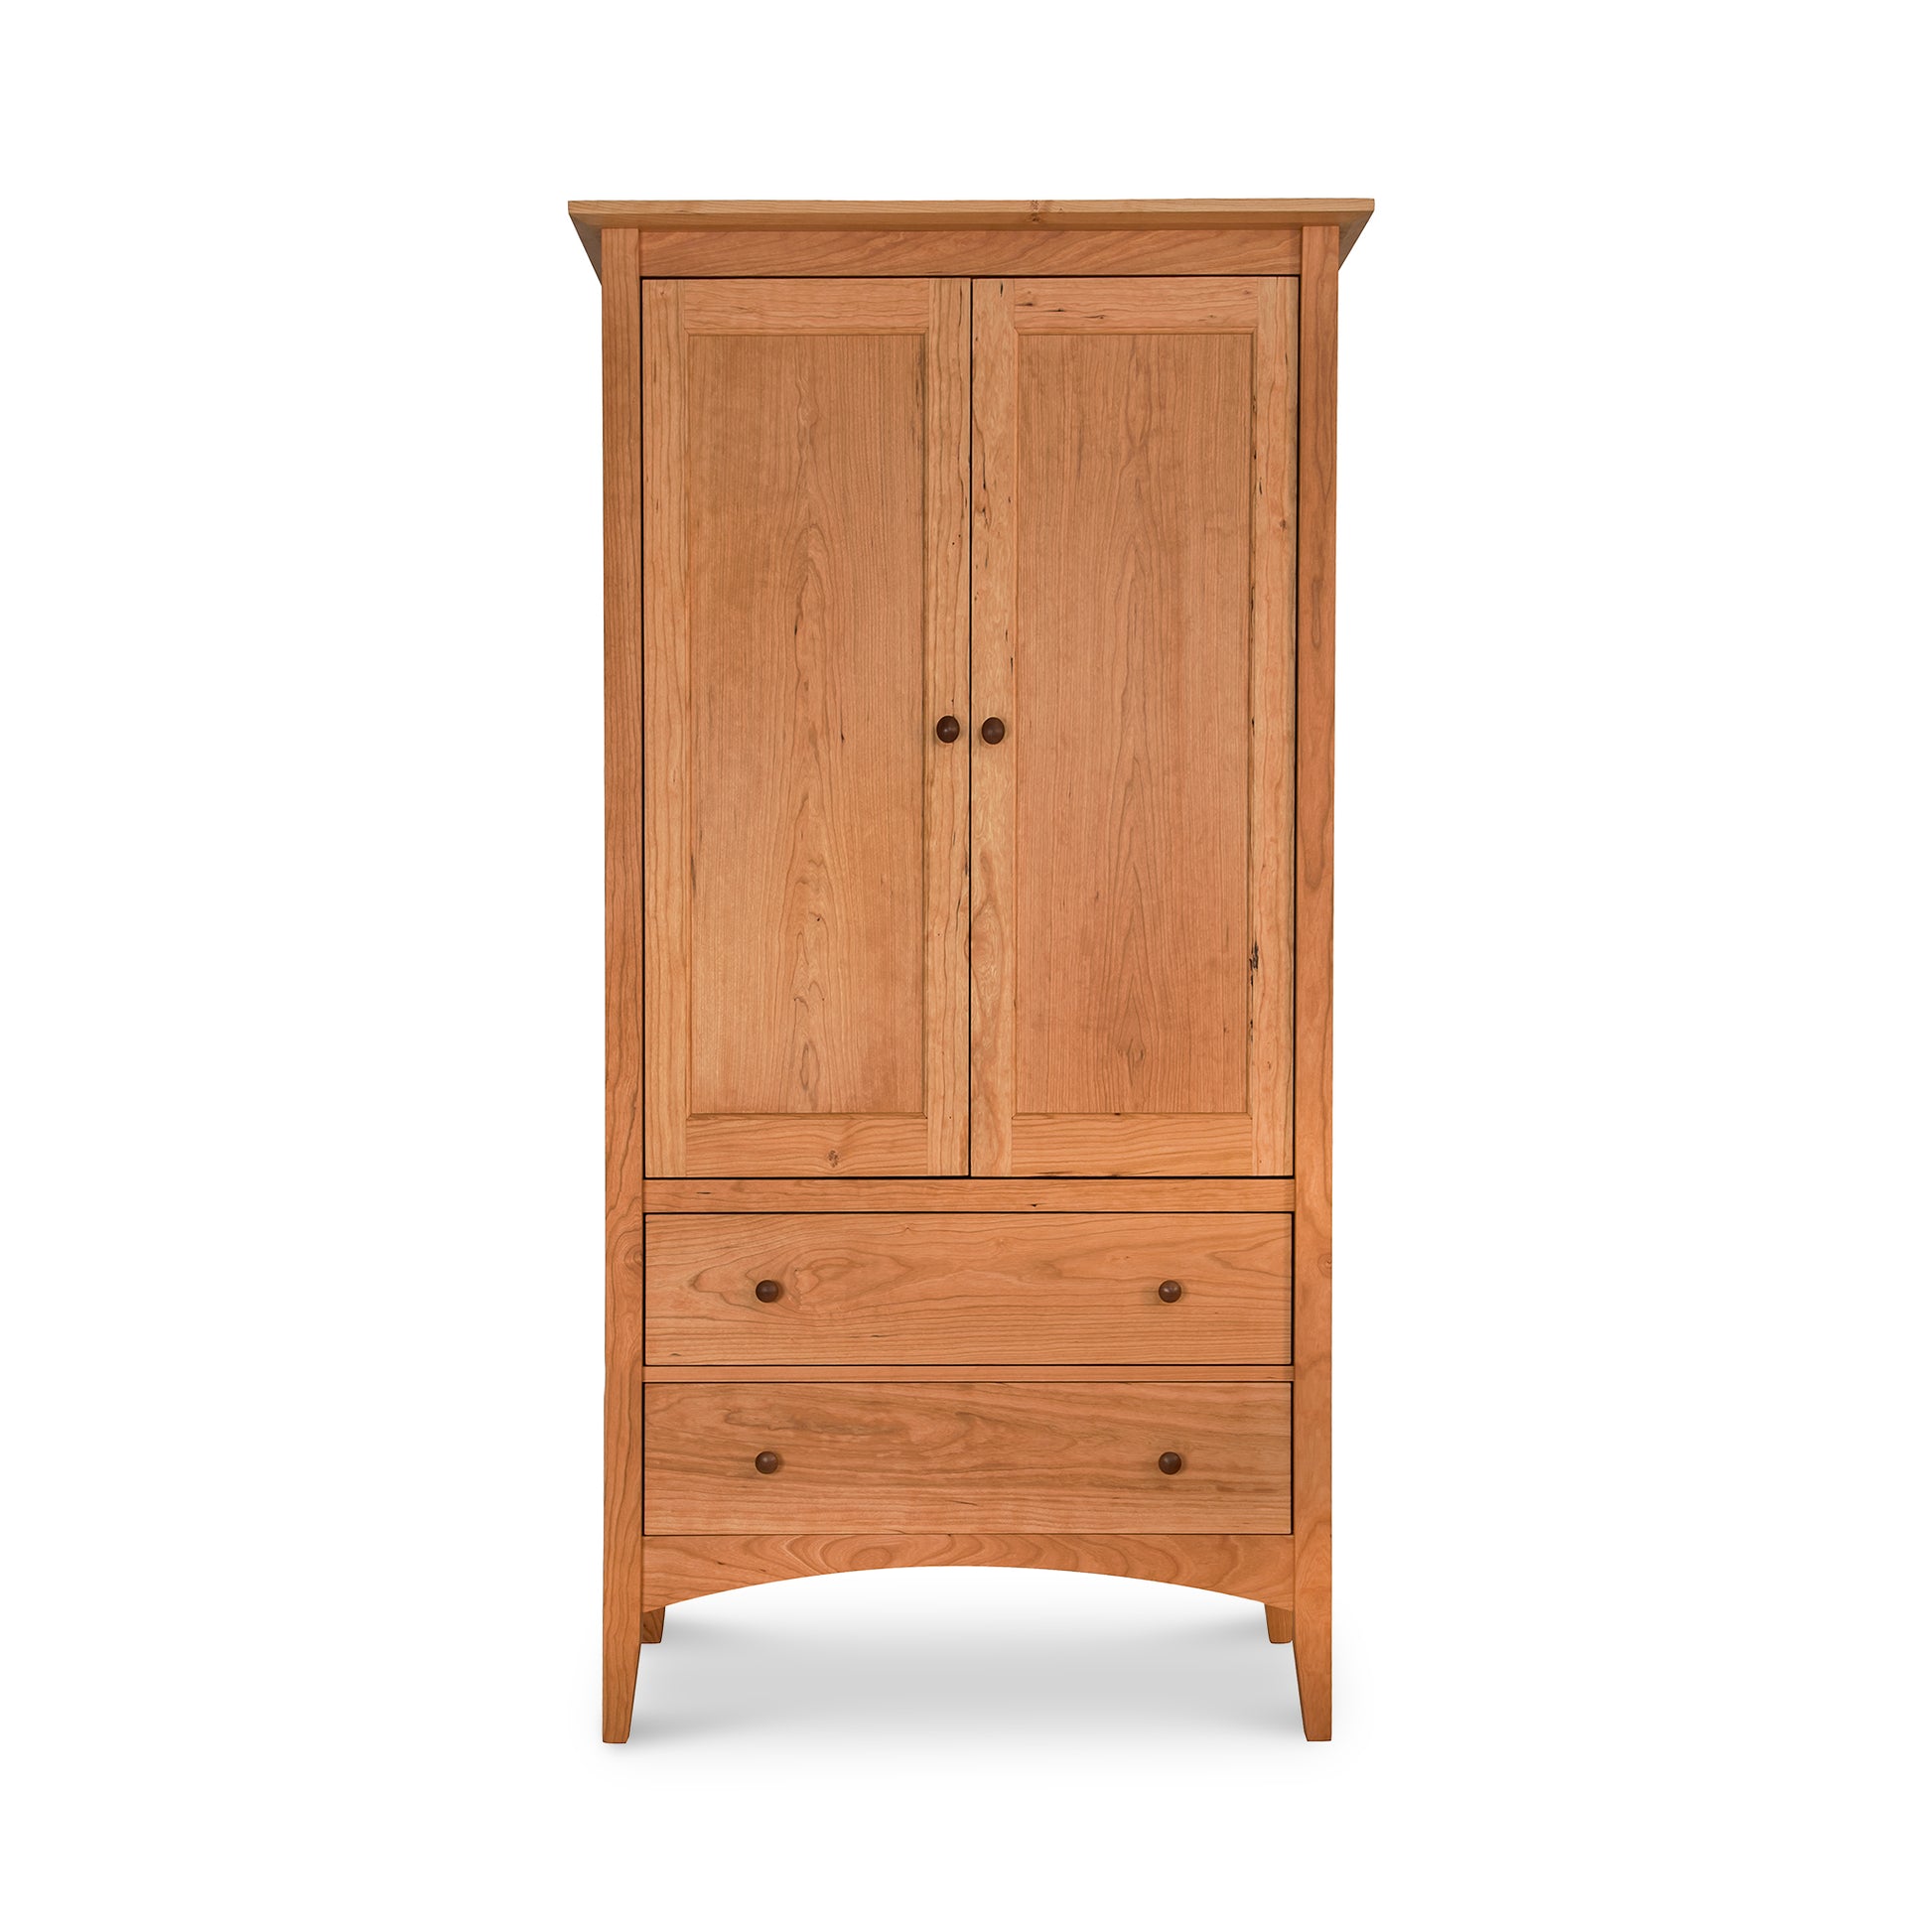 An American Shaker Armoire by Maple Corner Woodworks with two drawers and two doors.